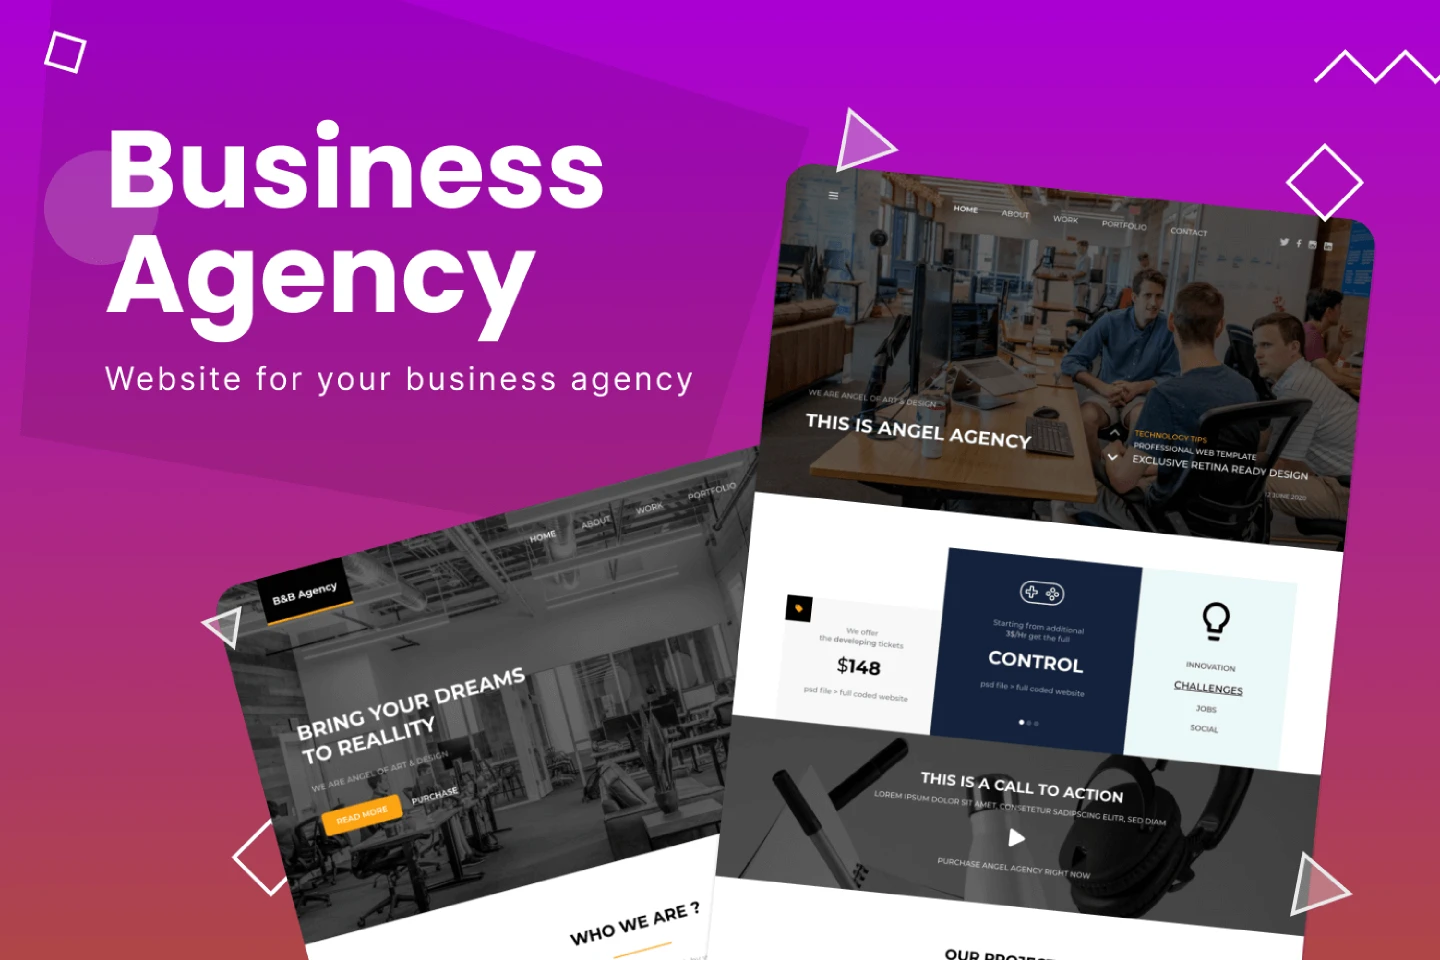 Business Agency web kit for Figma and Adobe XD